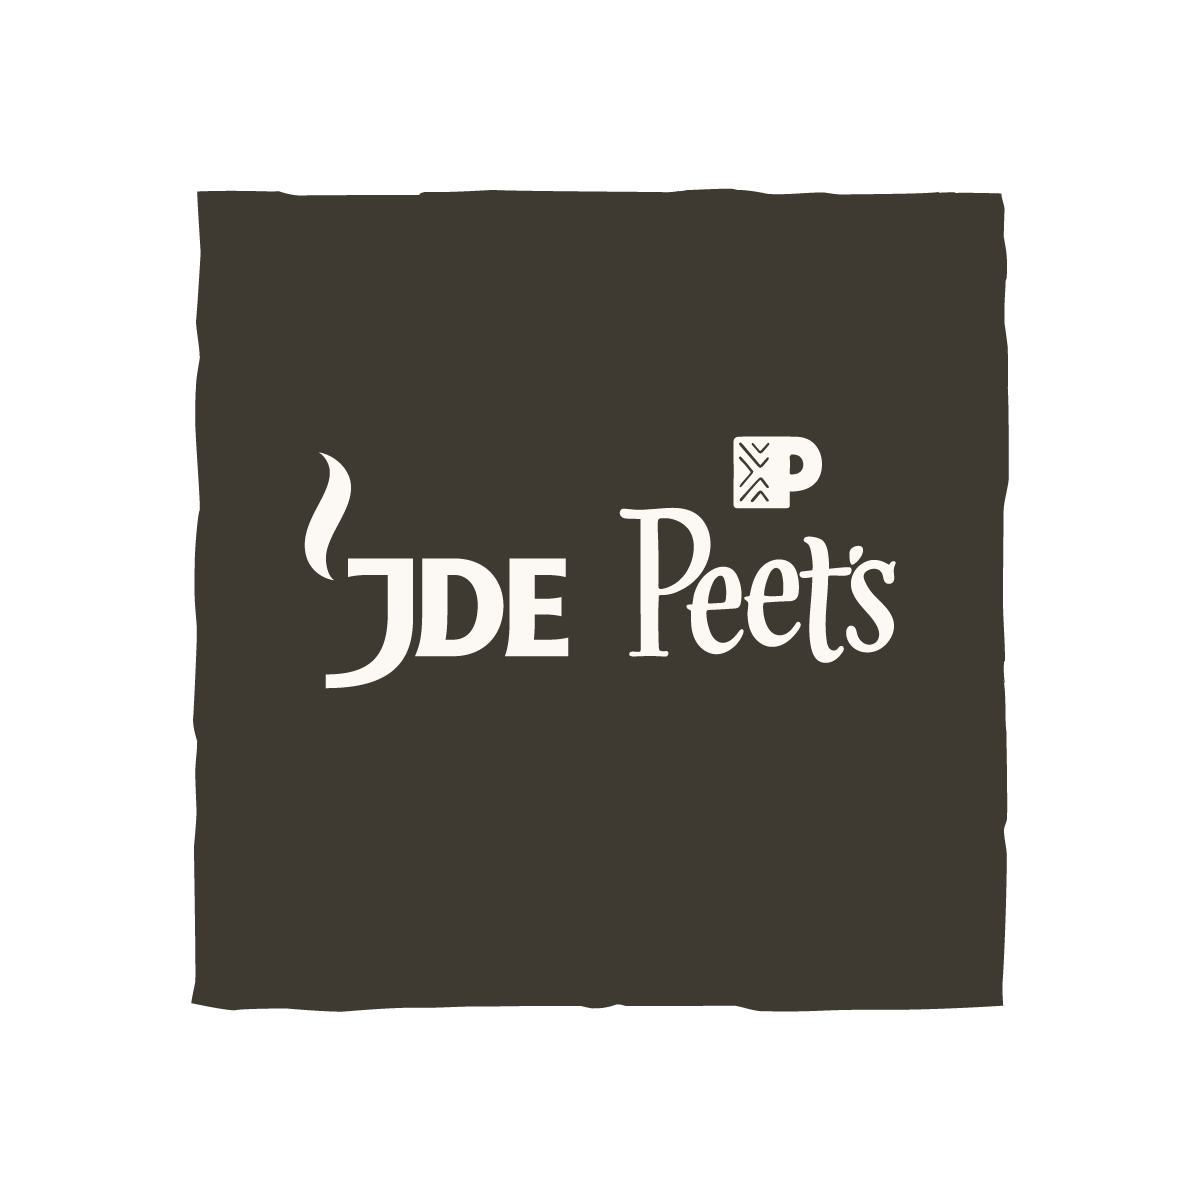 JDE Peet’s to expand its emerging markets presence through the intended acquisition of Maratá’s coffee & tea business in Brazil